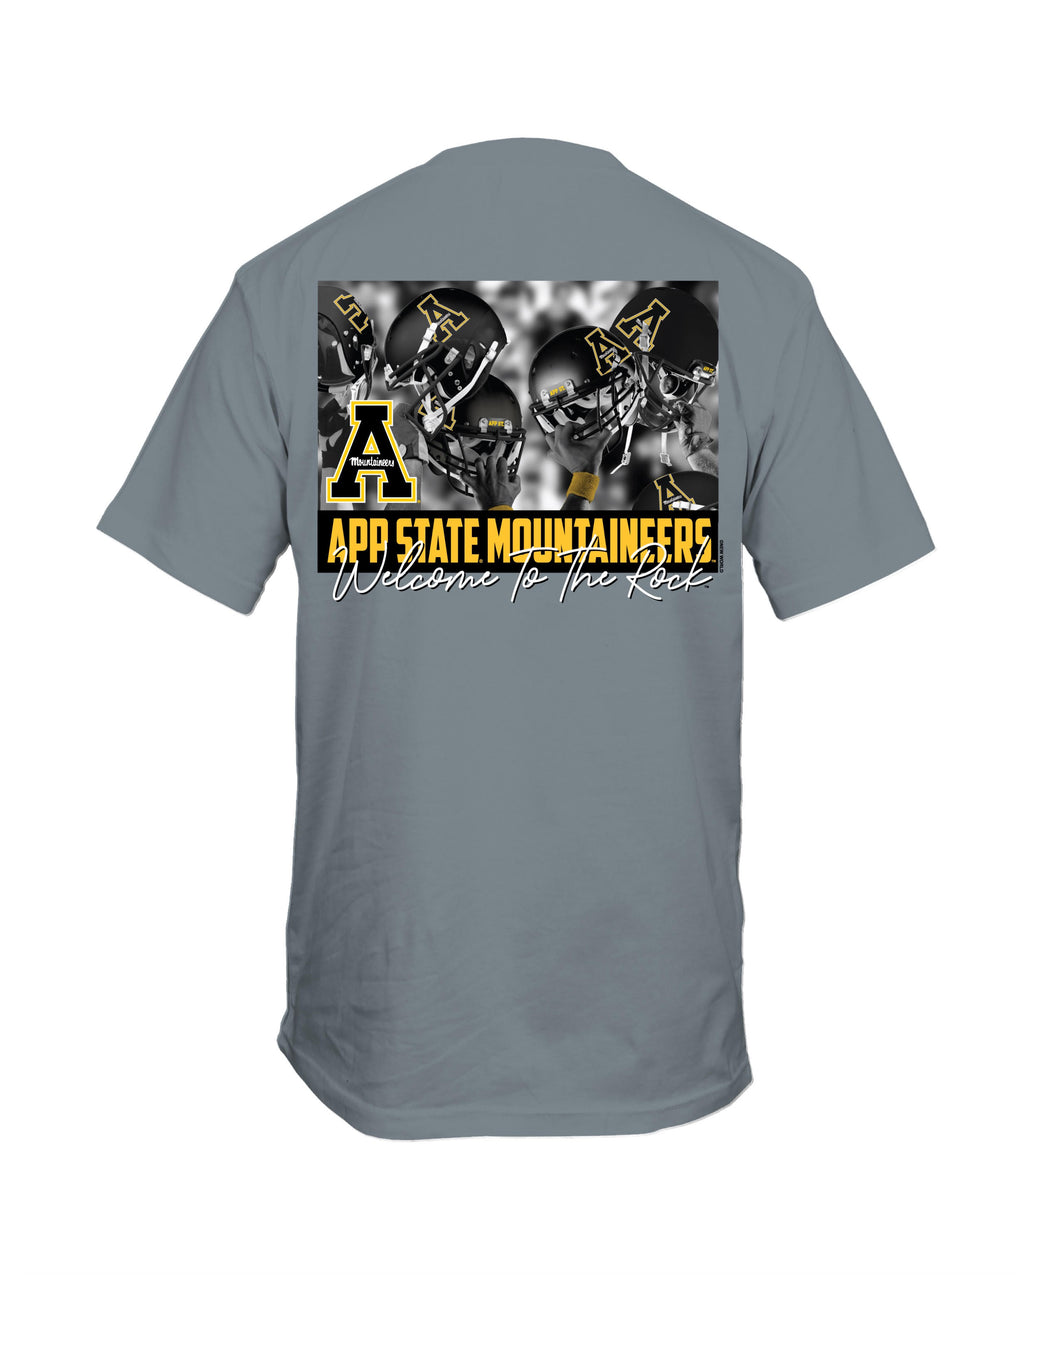 Appalachian State Welcome to The Rock T-shirt